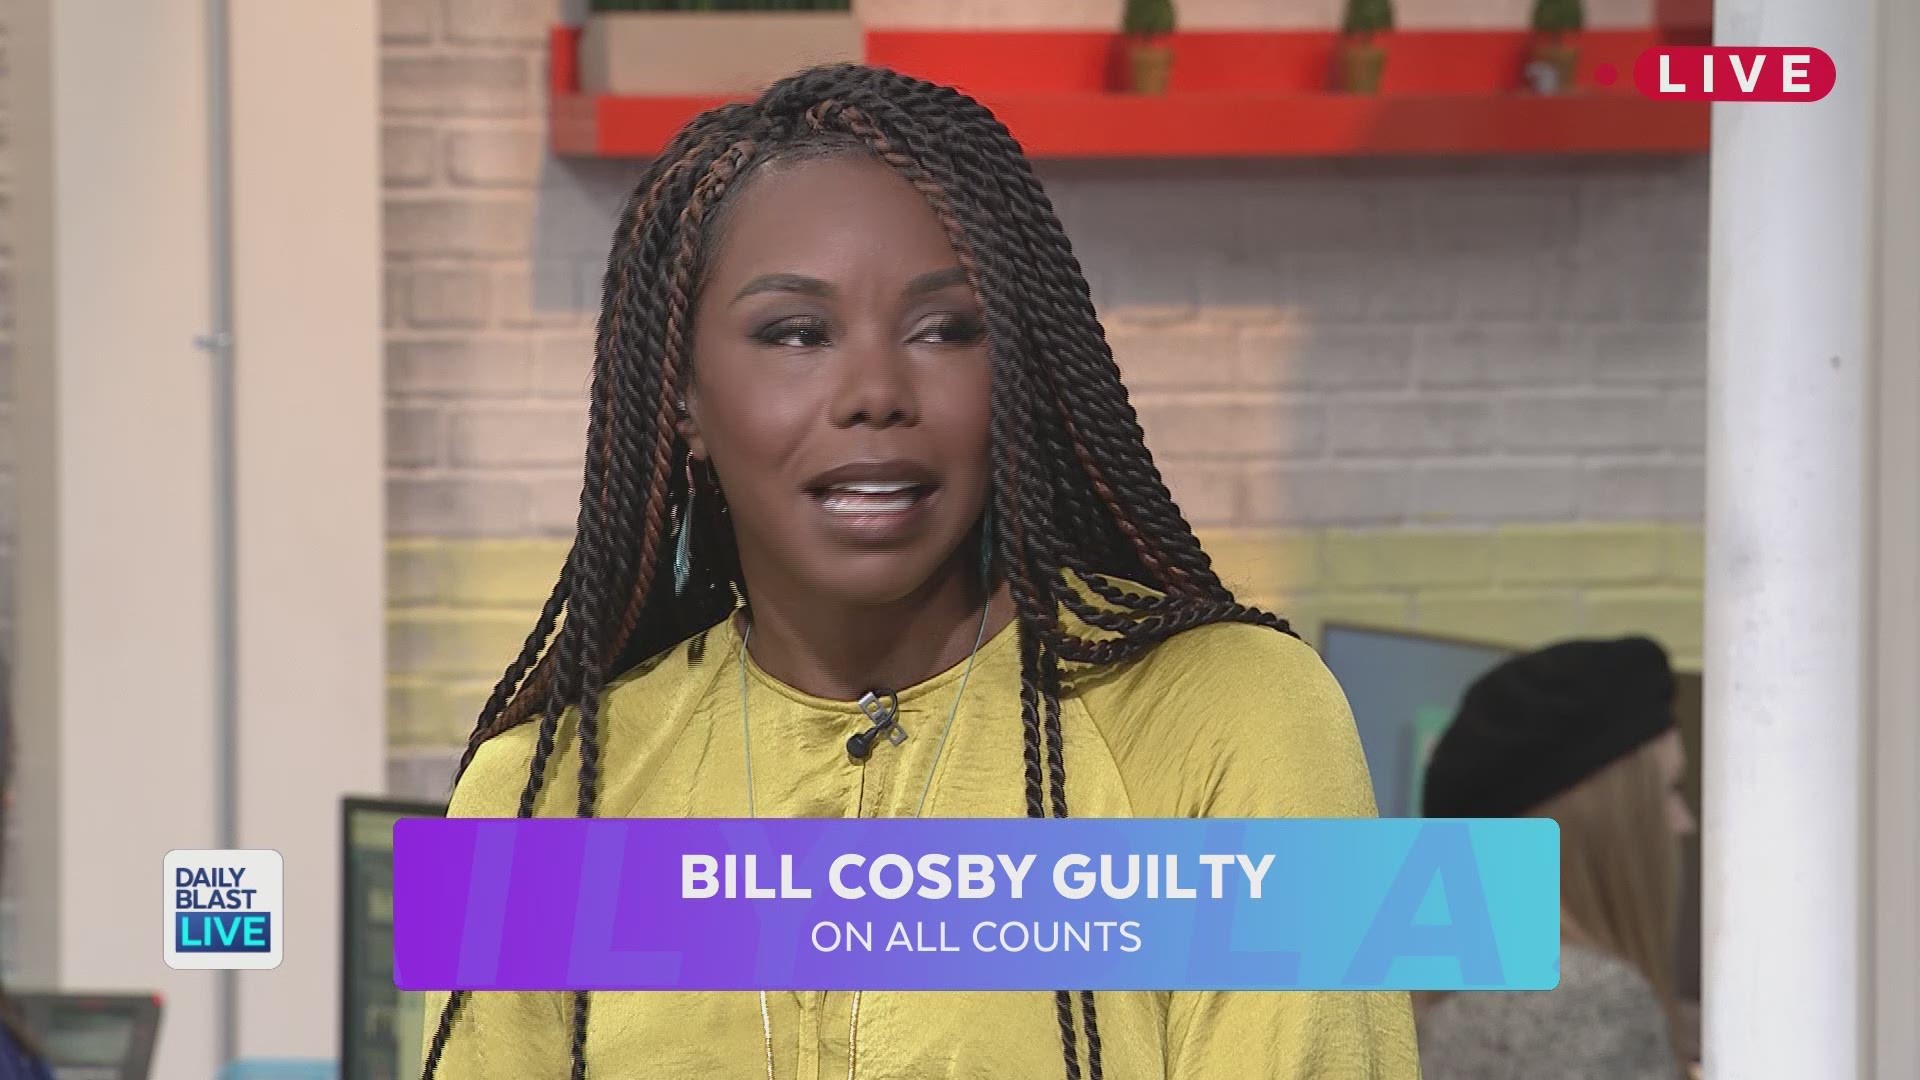 Daily Blast Live Host Erica Cobb gets emotional at the betrayal former Bill Cosby fans felt.